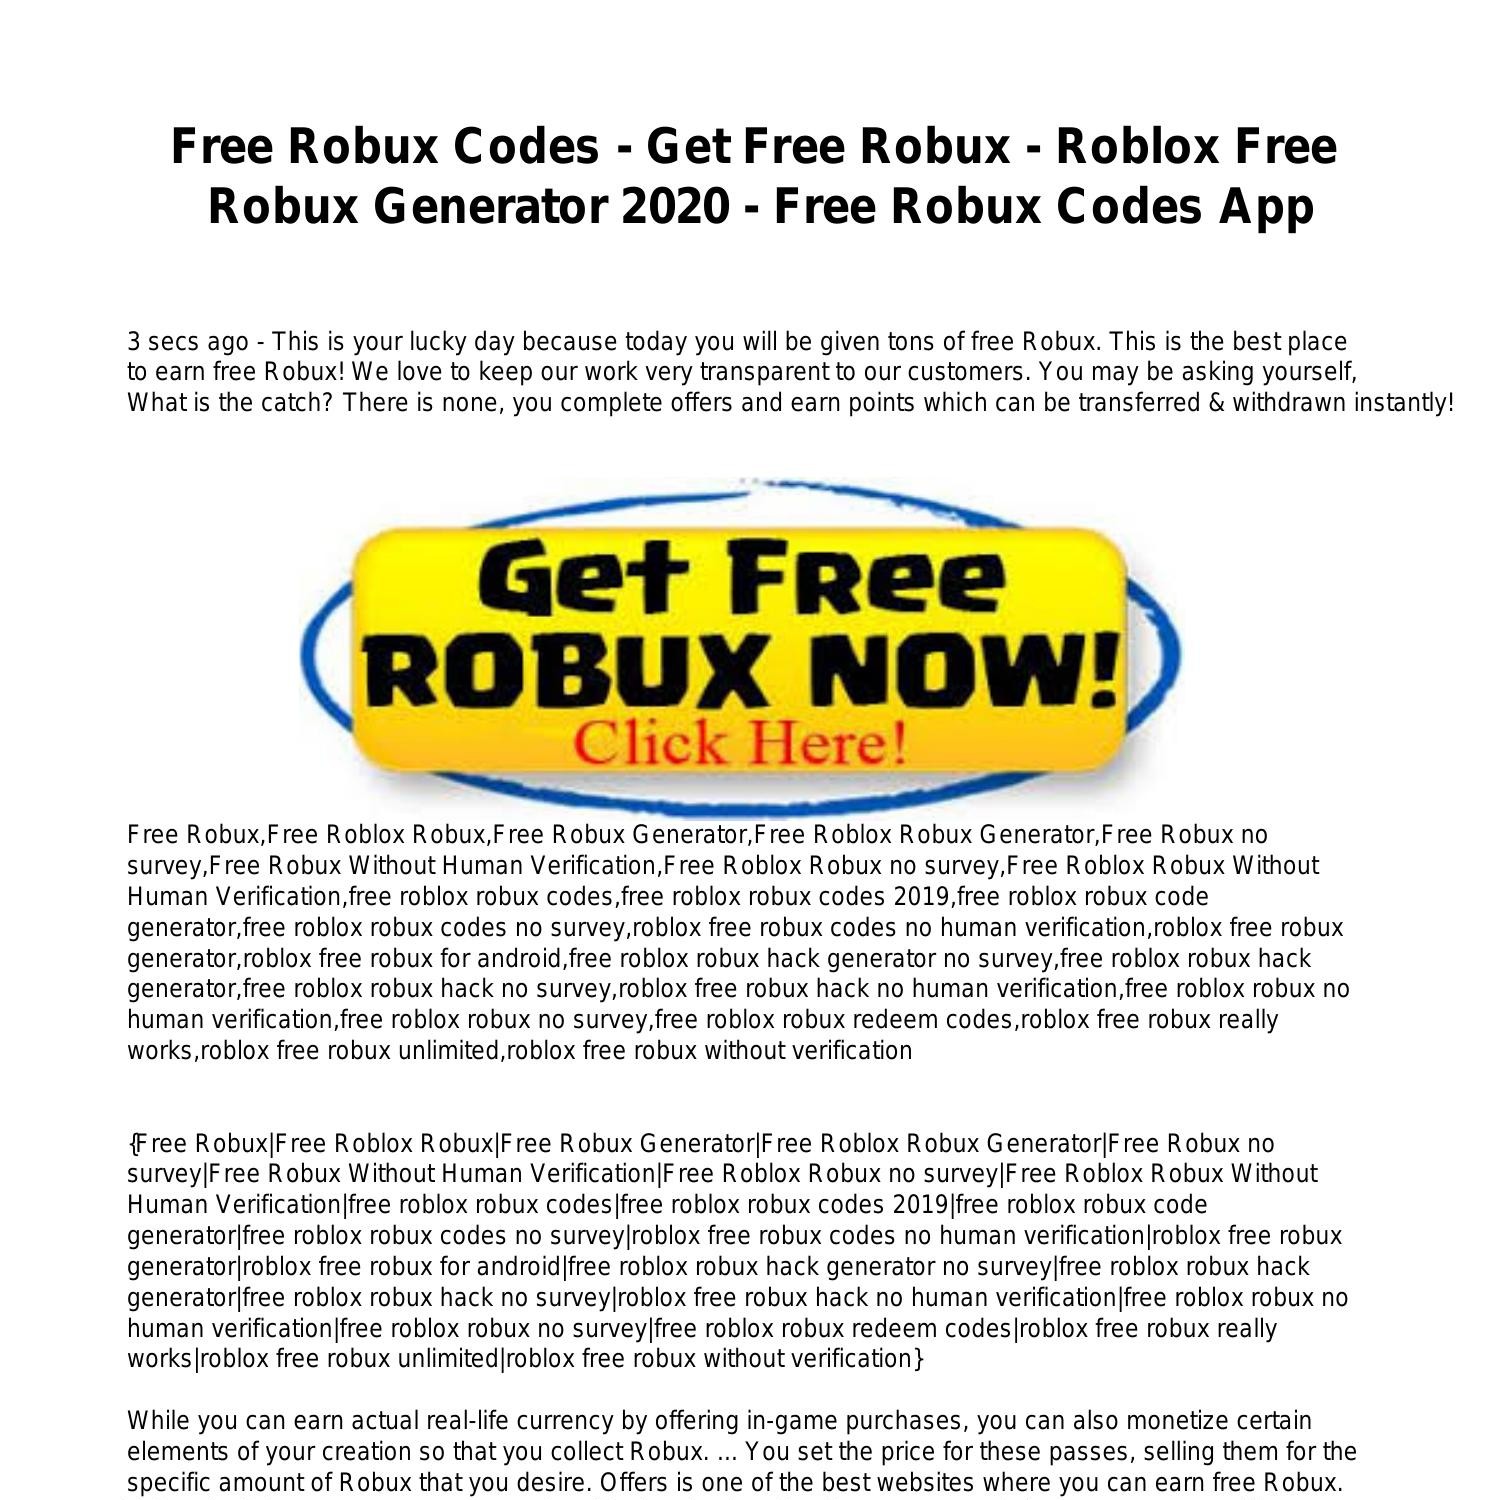 How To Get Robux For Free Codes For Free